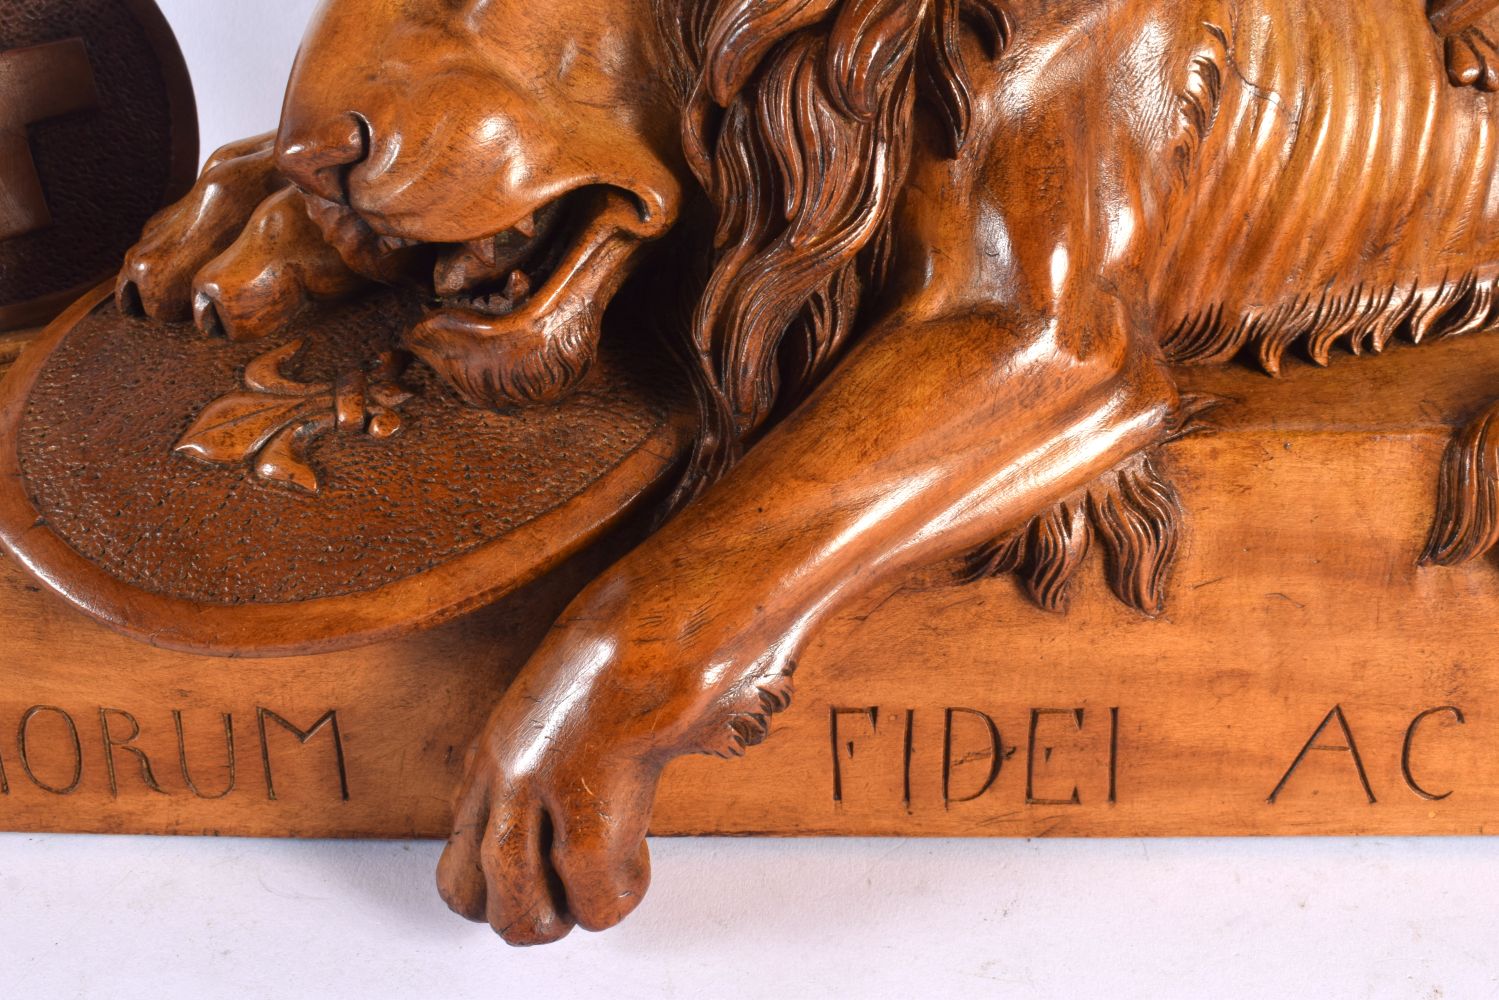 A FINE AND RARE LARGE 19TH CENTURY SWISS CARVED WOOD SCULPTURE OF LION LUCERNE modelled typically ov - Image 4 of 7